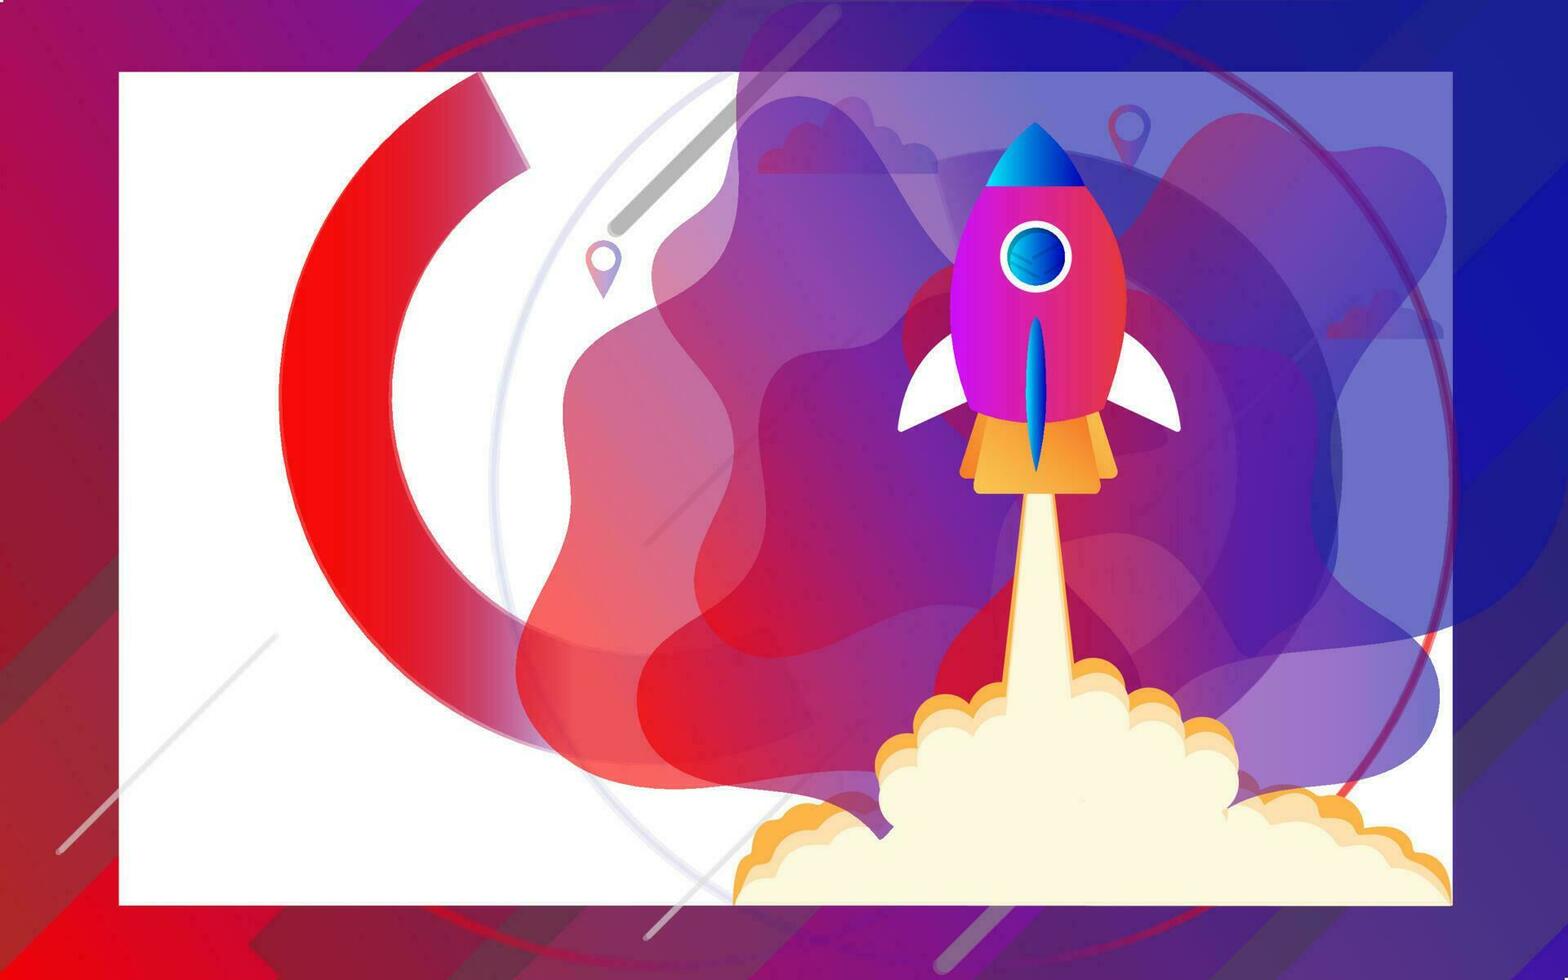 Advertising banner or poster design with illustration of launching a rocket on abstract background for Startup concept based design. vector